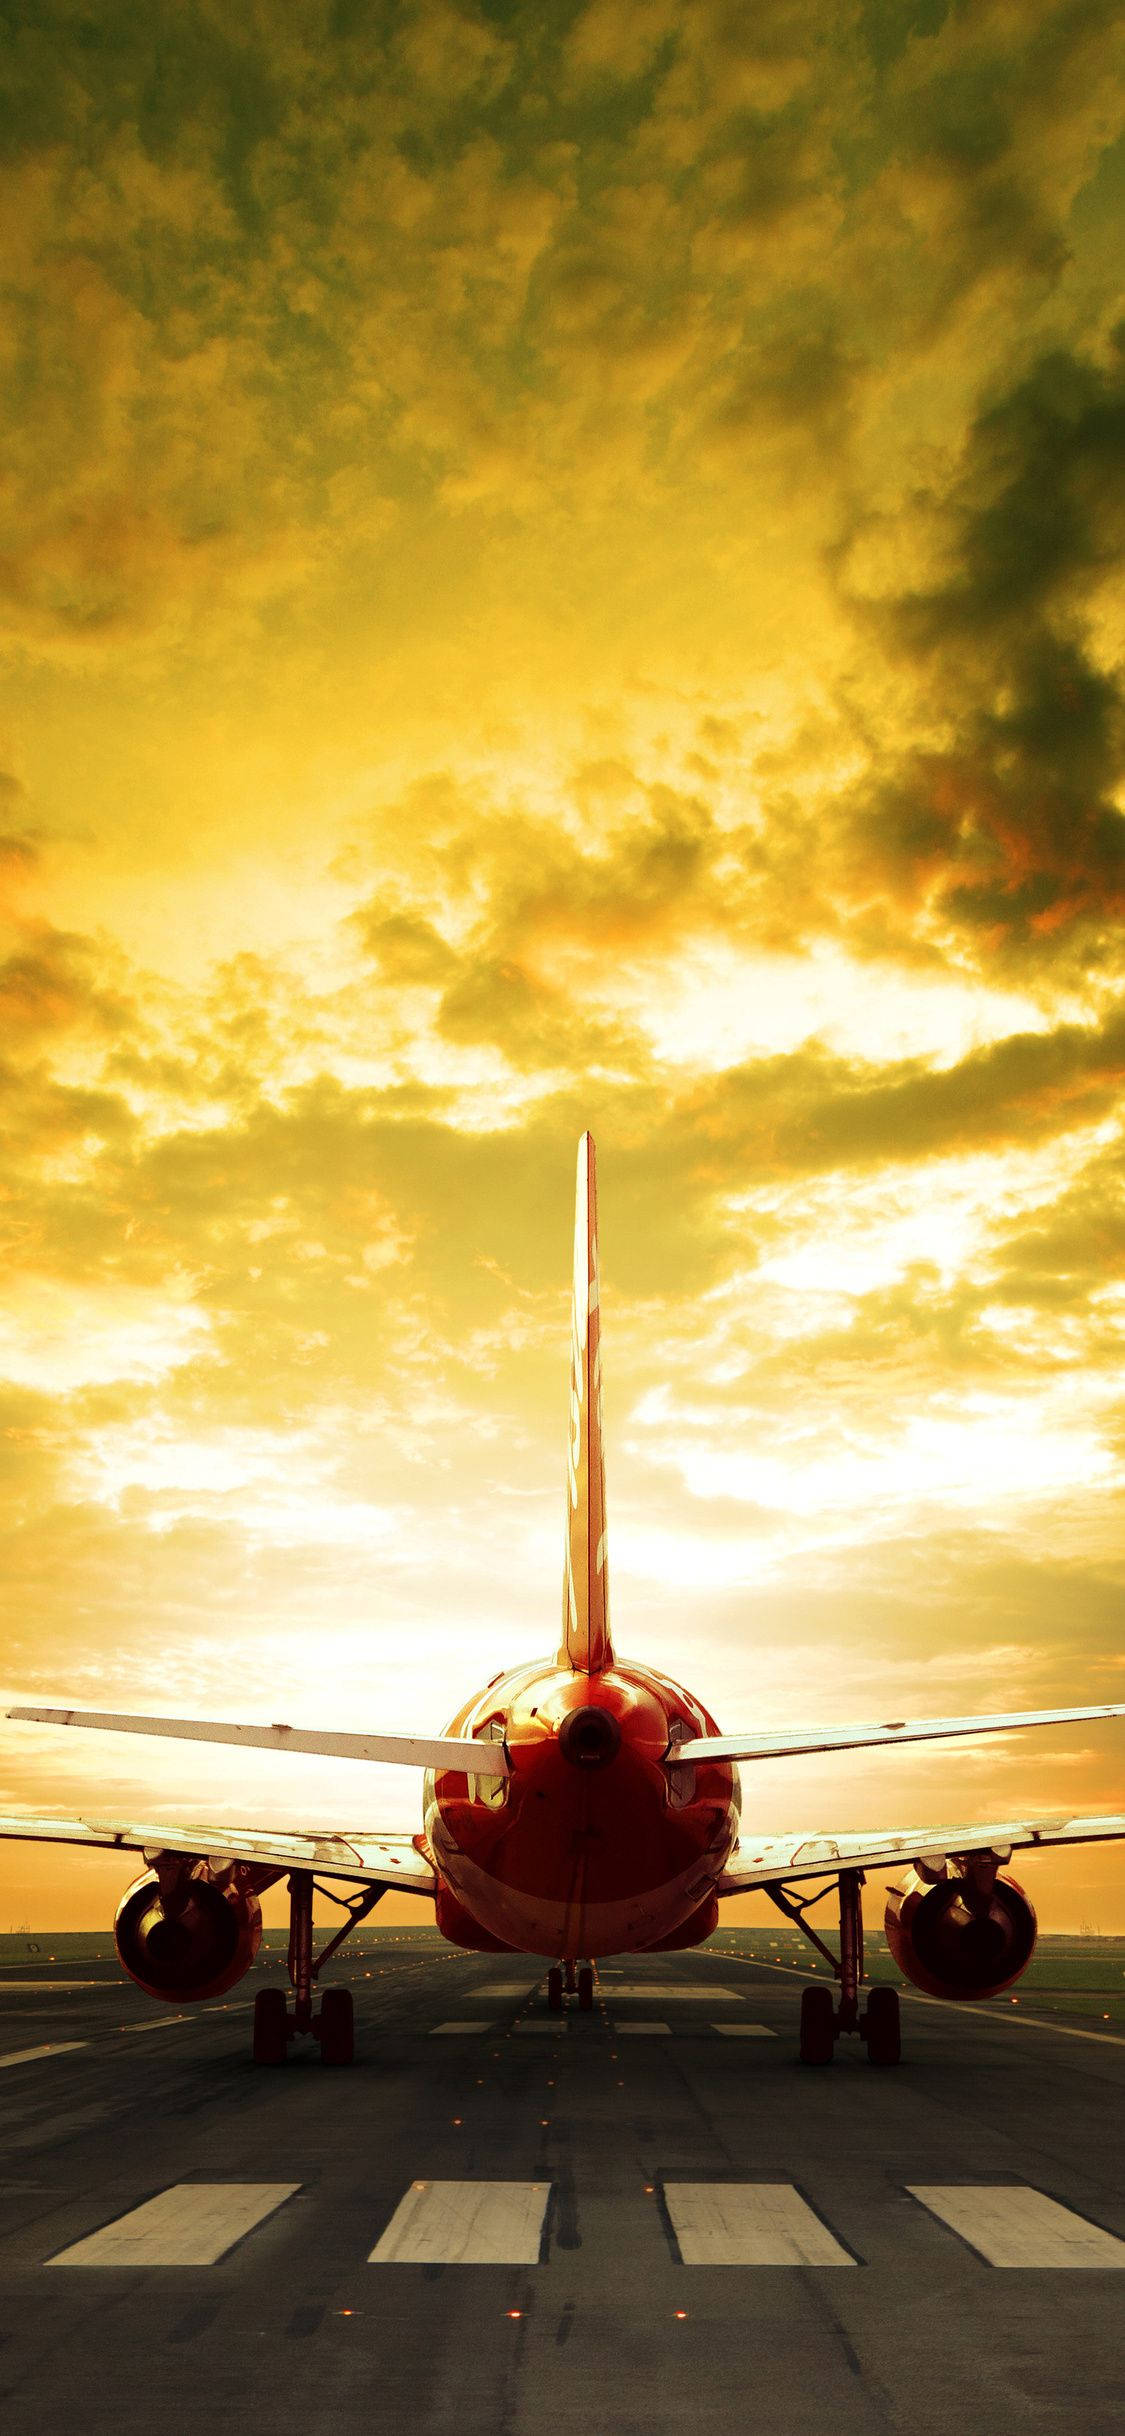 Runway With A Red Airplane Android Background